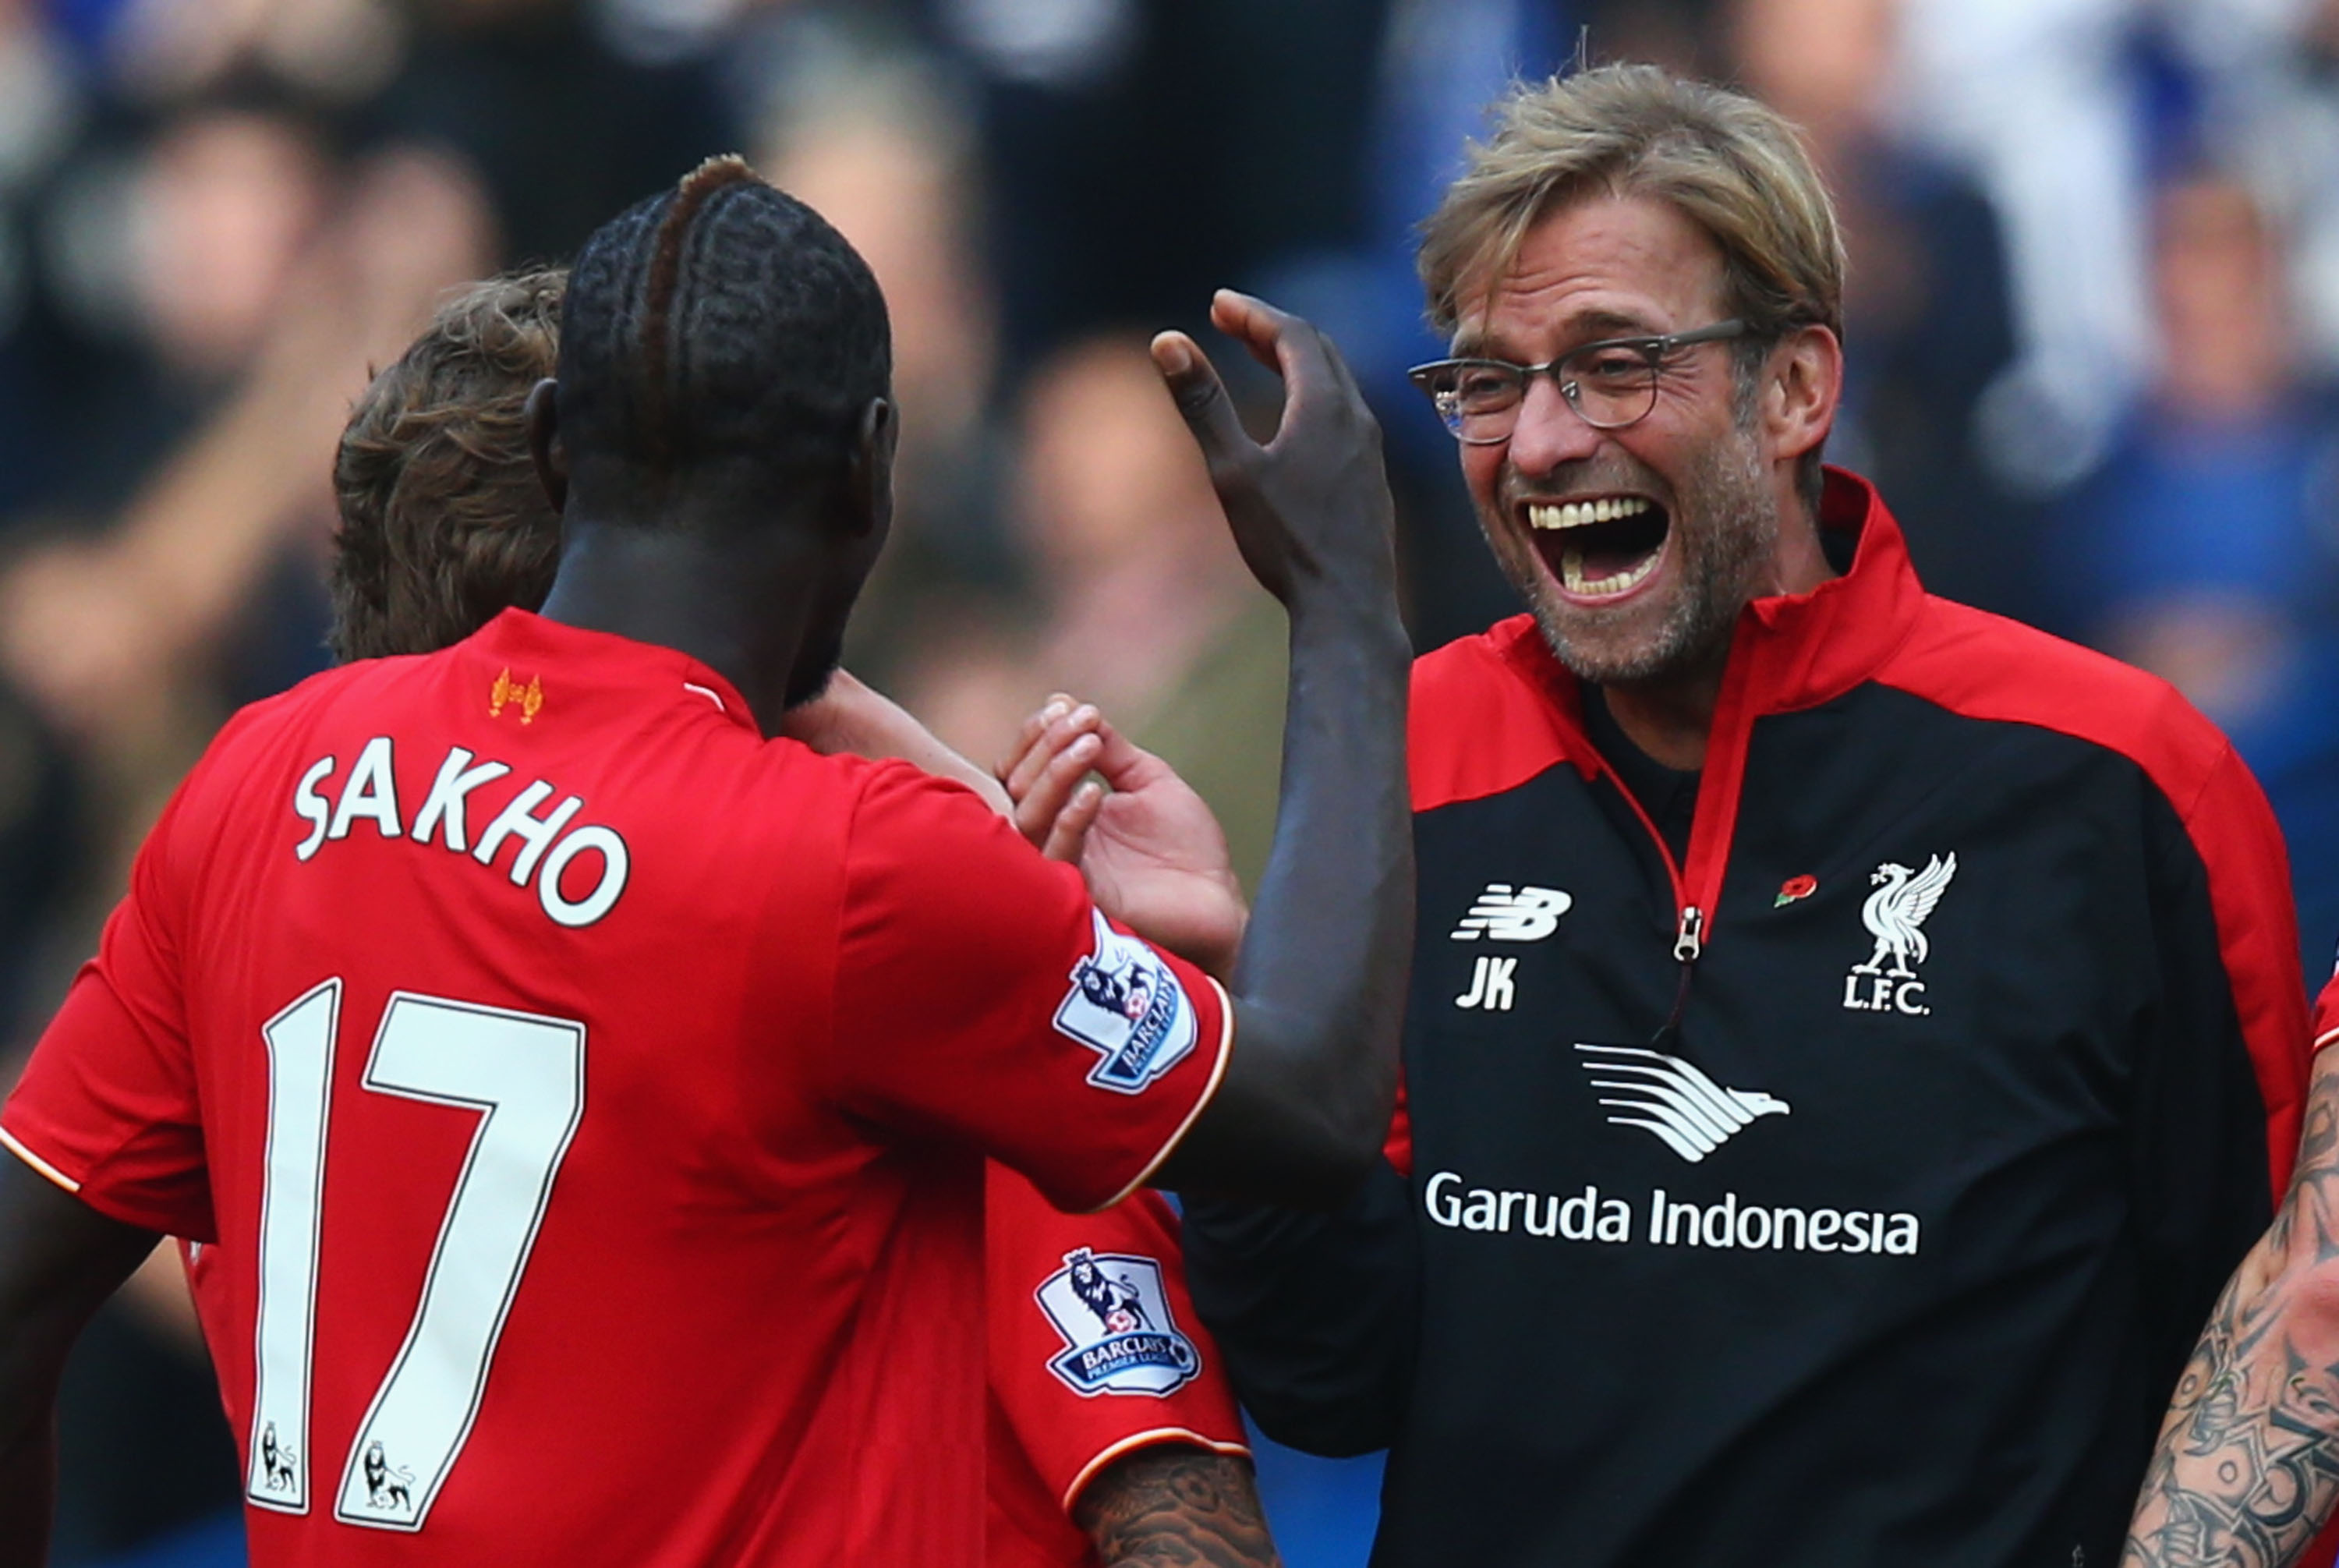 LONDON, ENGLAND - OCTOBER 31:  Jurgen Klopp (R), manager of Liverpool celebrates his team's 3-1 win with his player Mamadou Sakho (L) after the Barclays Premier League match between Chelsea and Liverpool at Stamford Bridge on October 31, 2015 in London, England.  (Photo by Clive Rose/Getty Images)